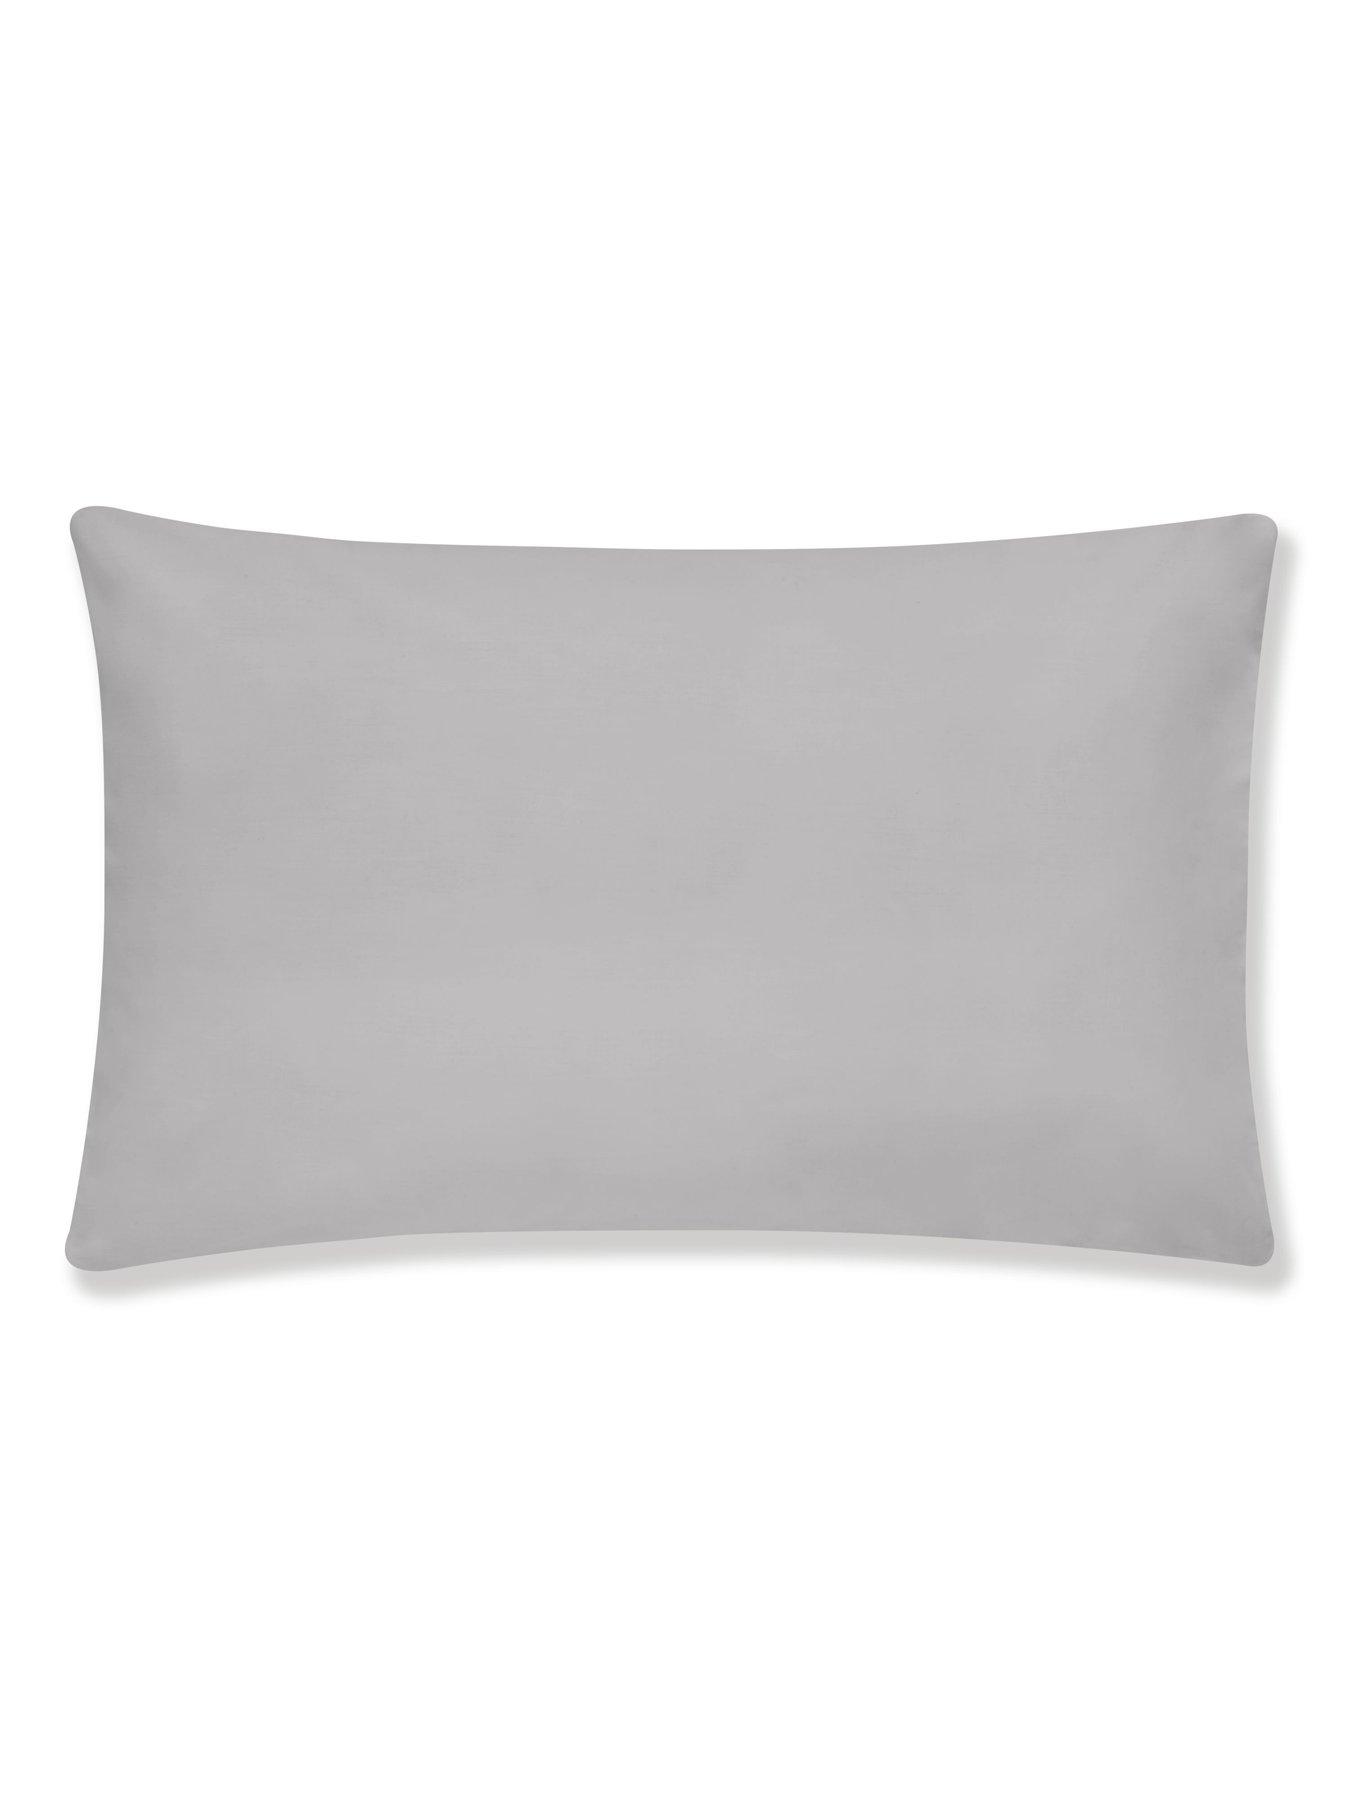 Details about   FLANNELETTE HOUSEWIFE PILLOW CASES 50 X 75CM 100% BRUSHED COTTON PILLOWCASE PAIR 